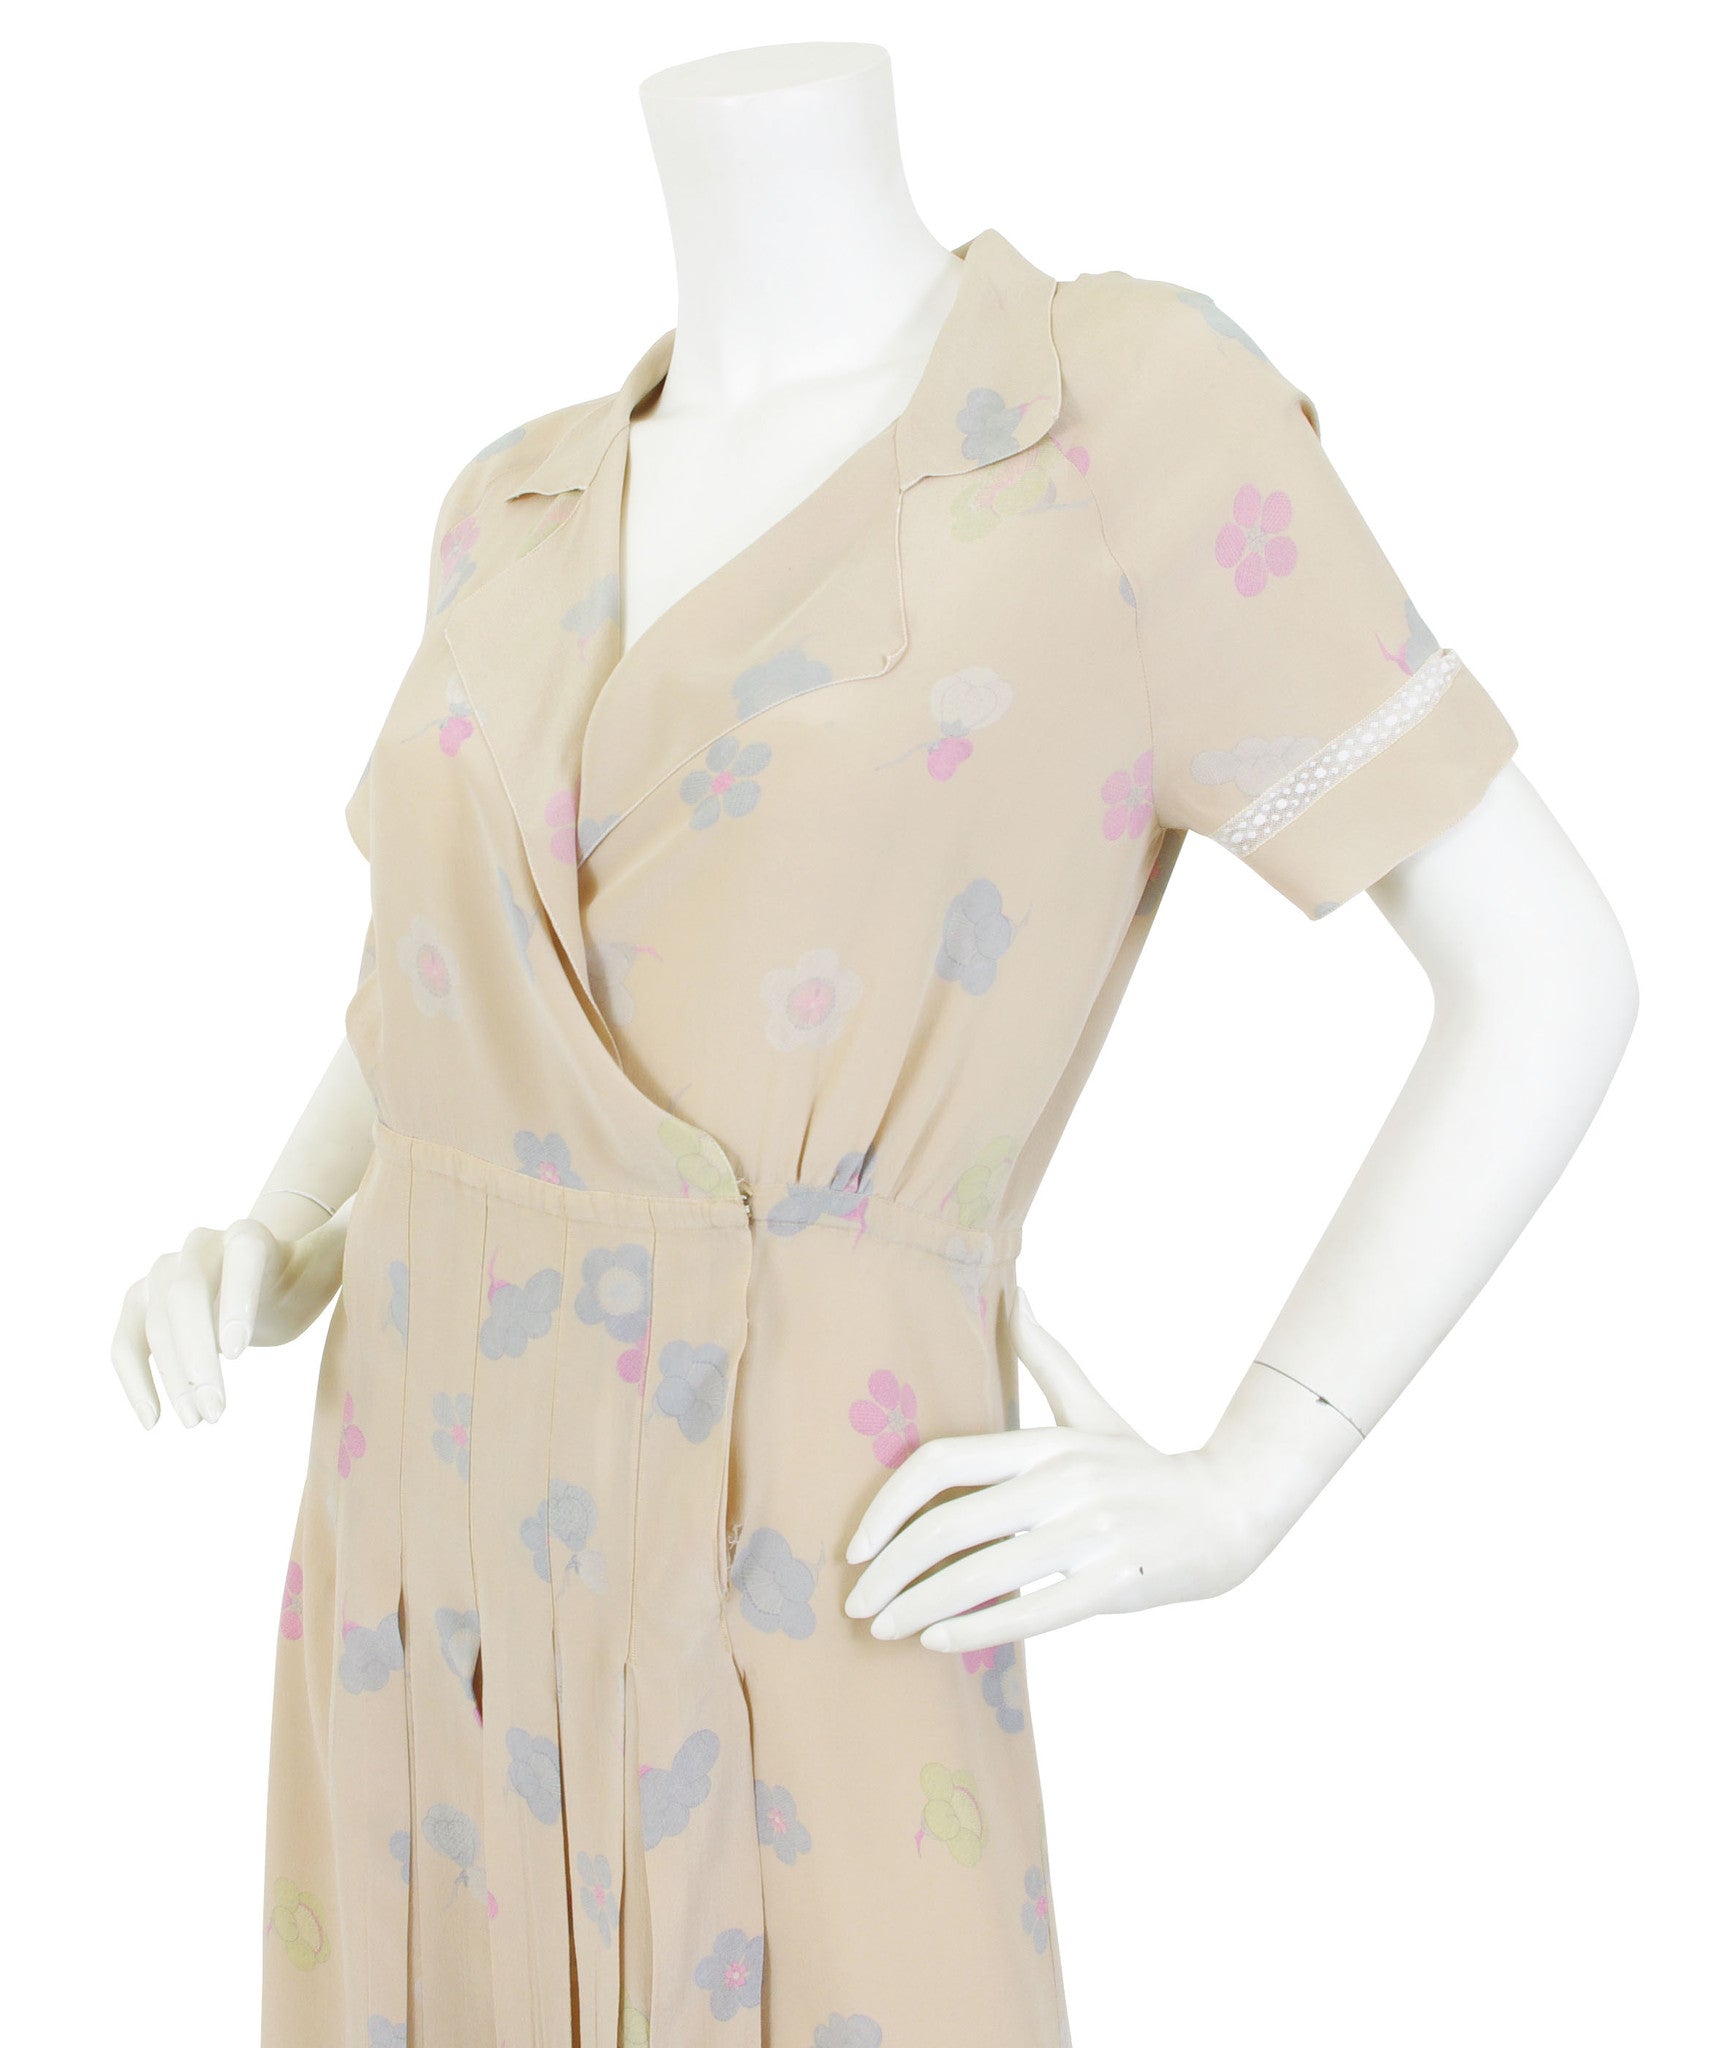 1970s Floral Silk Lace Inset Dress by Karl Lagerfeld